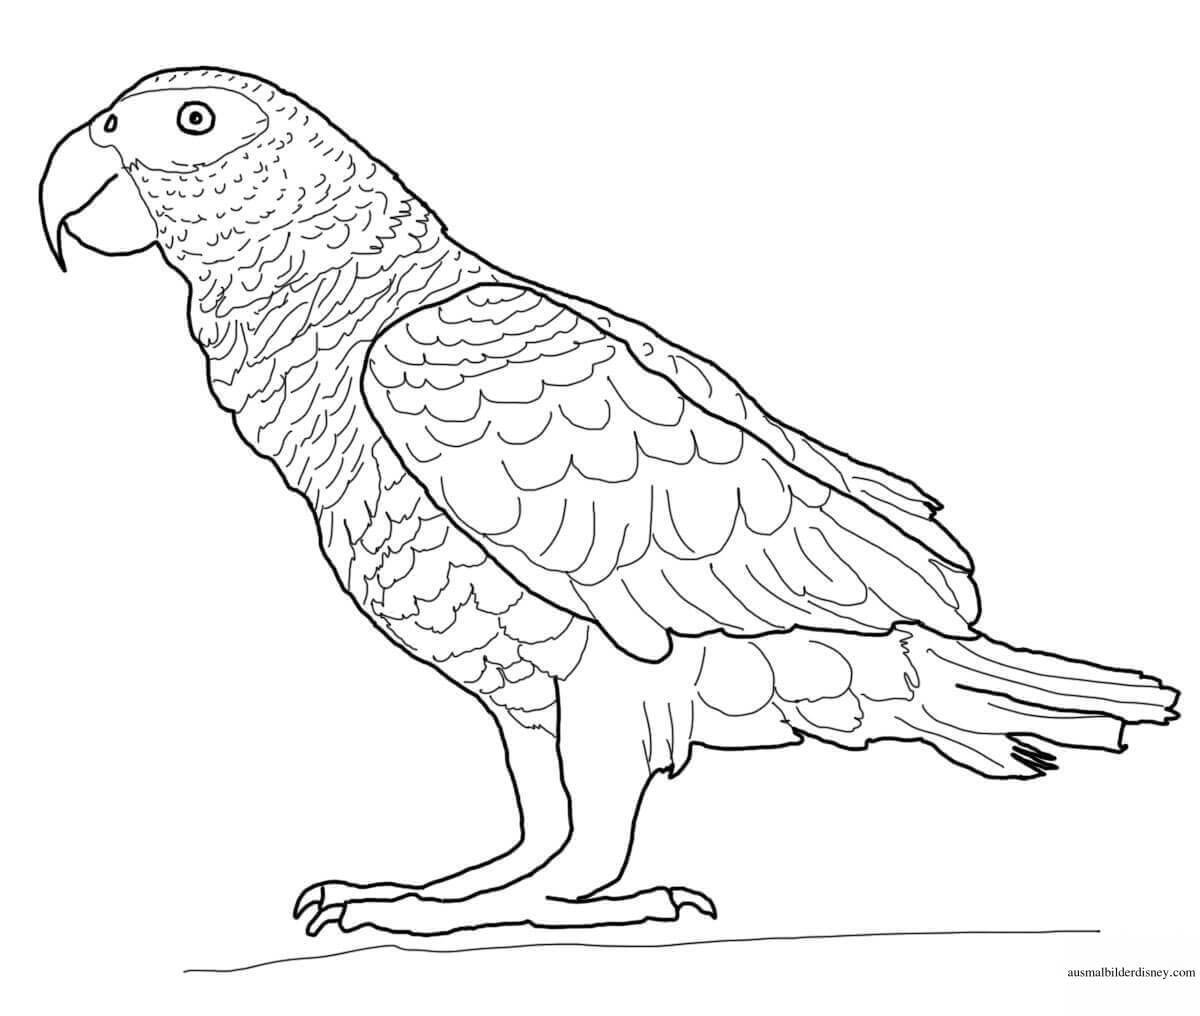 Colourful parrot coloring book for kids